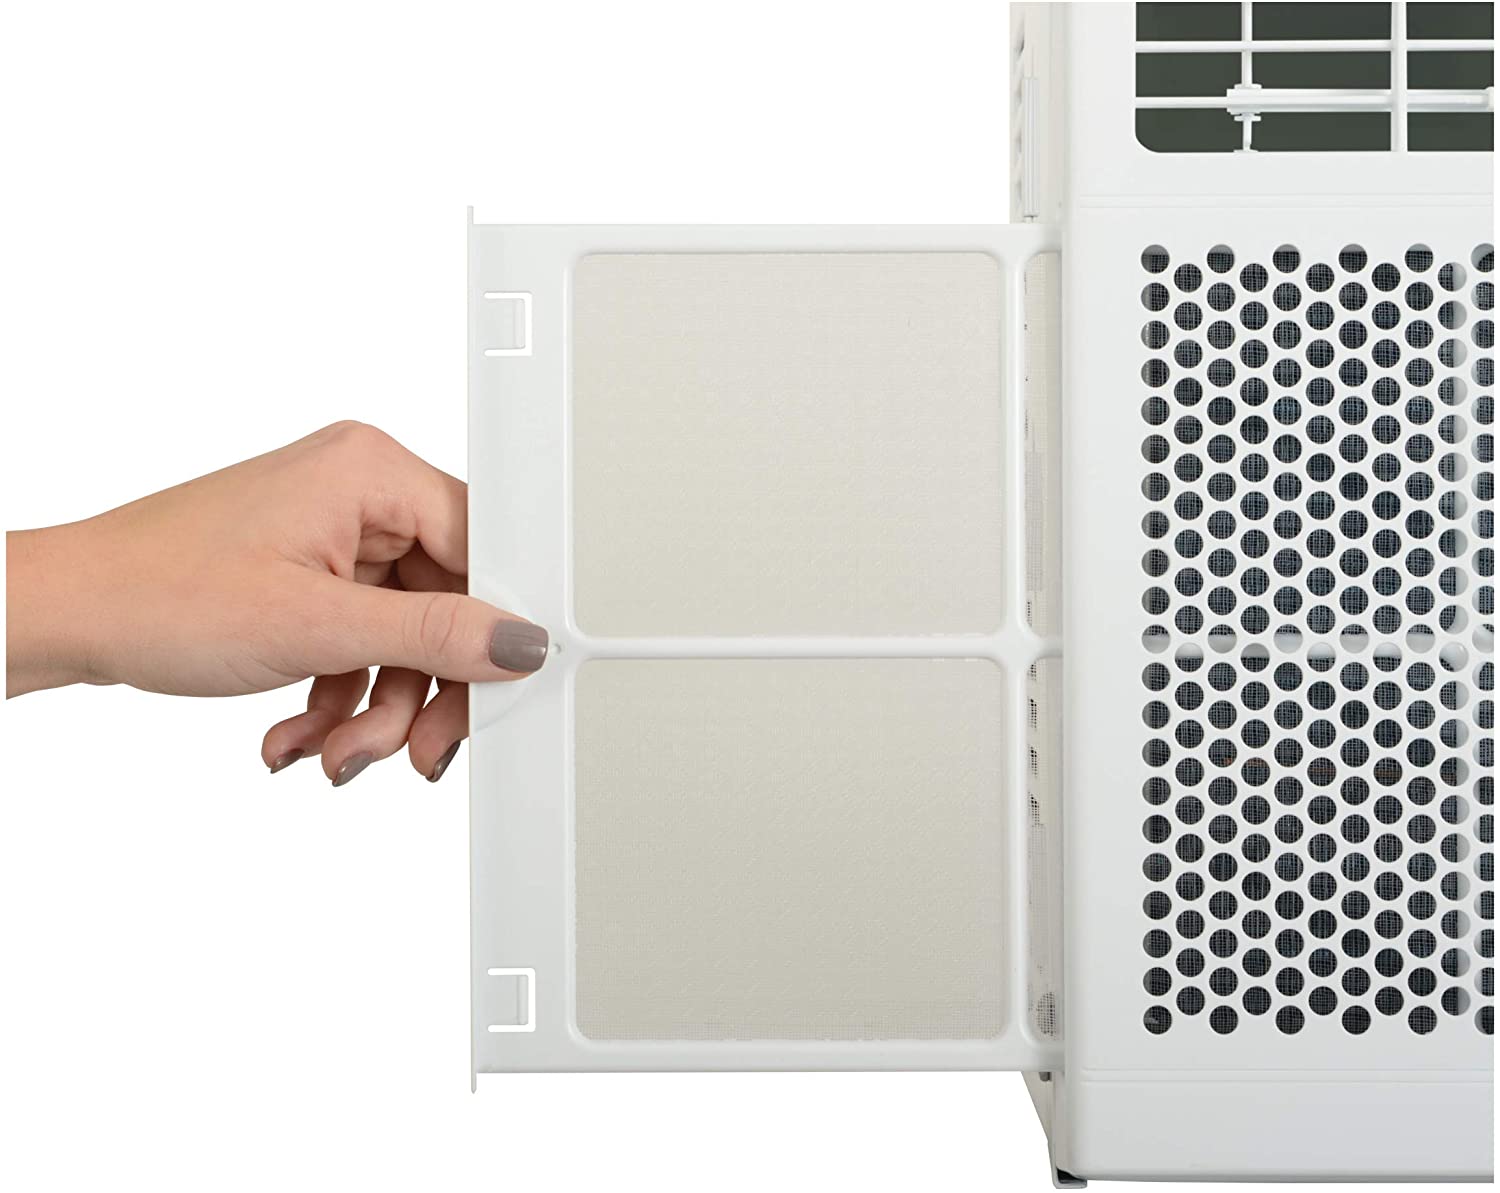 Haier 5,050 BTU Mechanical Window Air Conditioner for Small Rooms up to 150 sq ft Specs